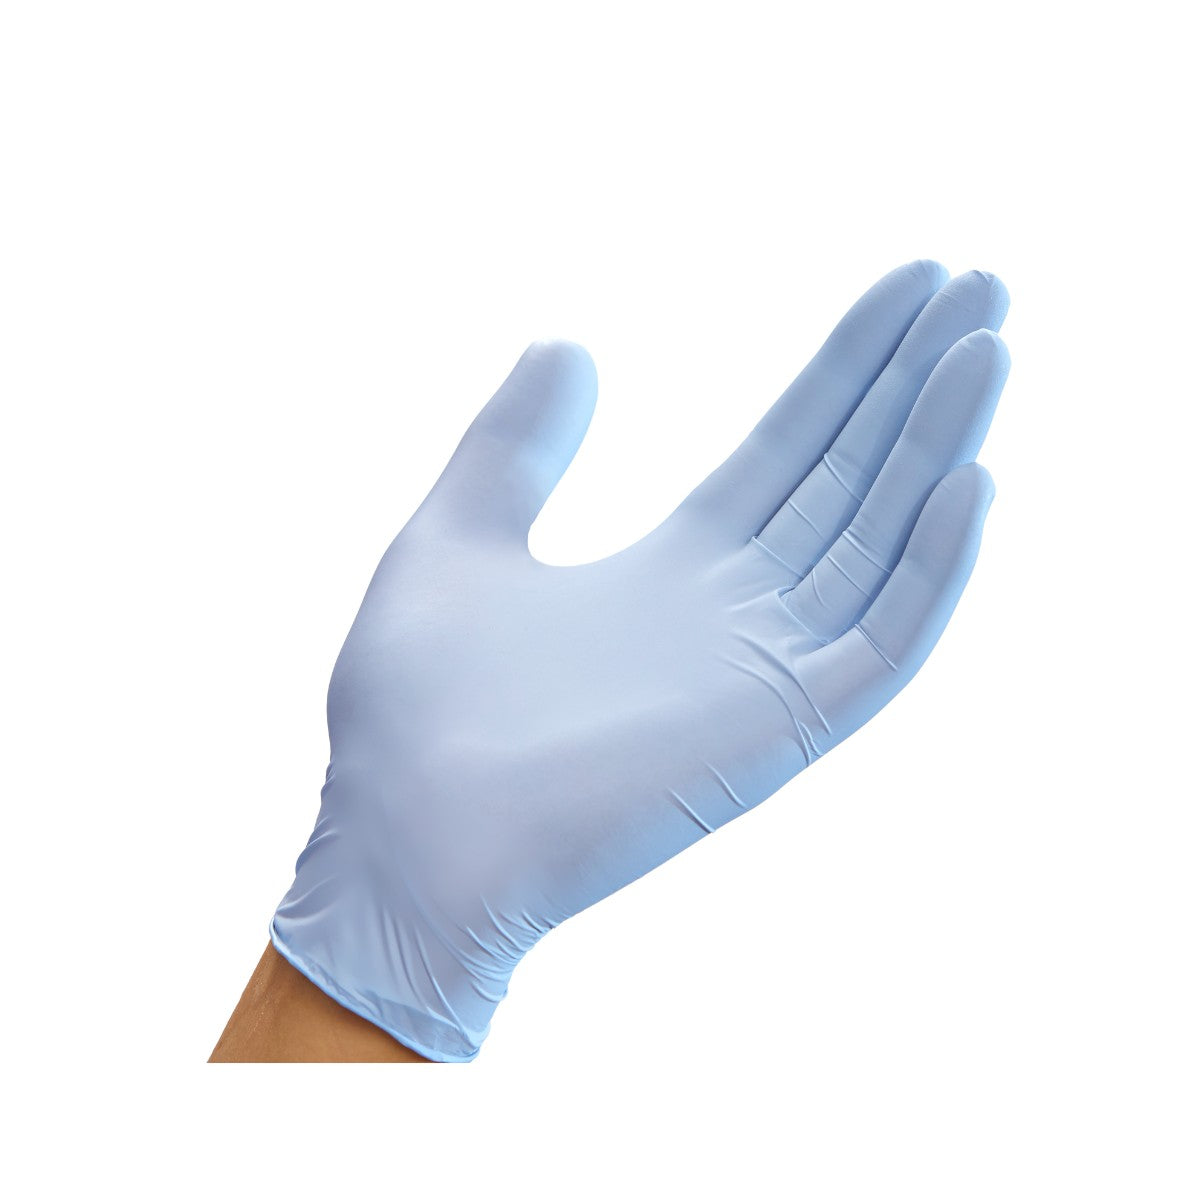 GloveOn® COATS®  Nitrile Gloves CTS121 (Carton of 10 Boxes)